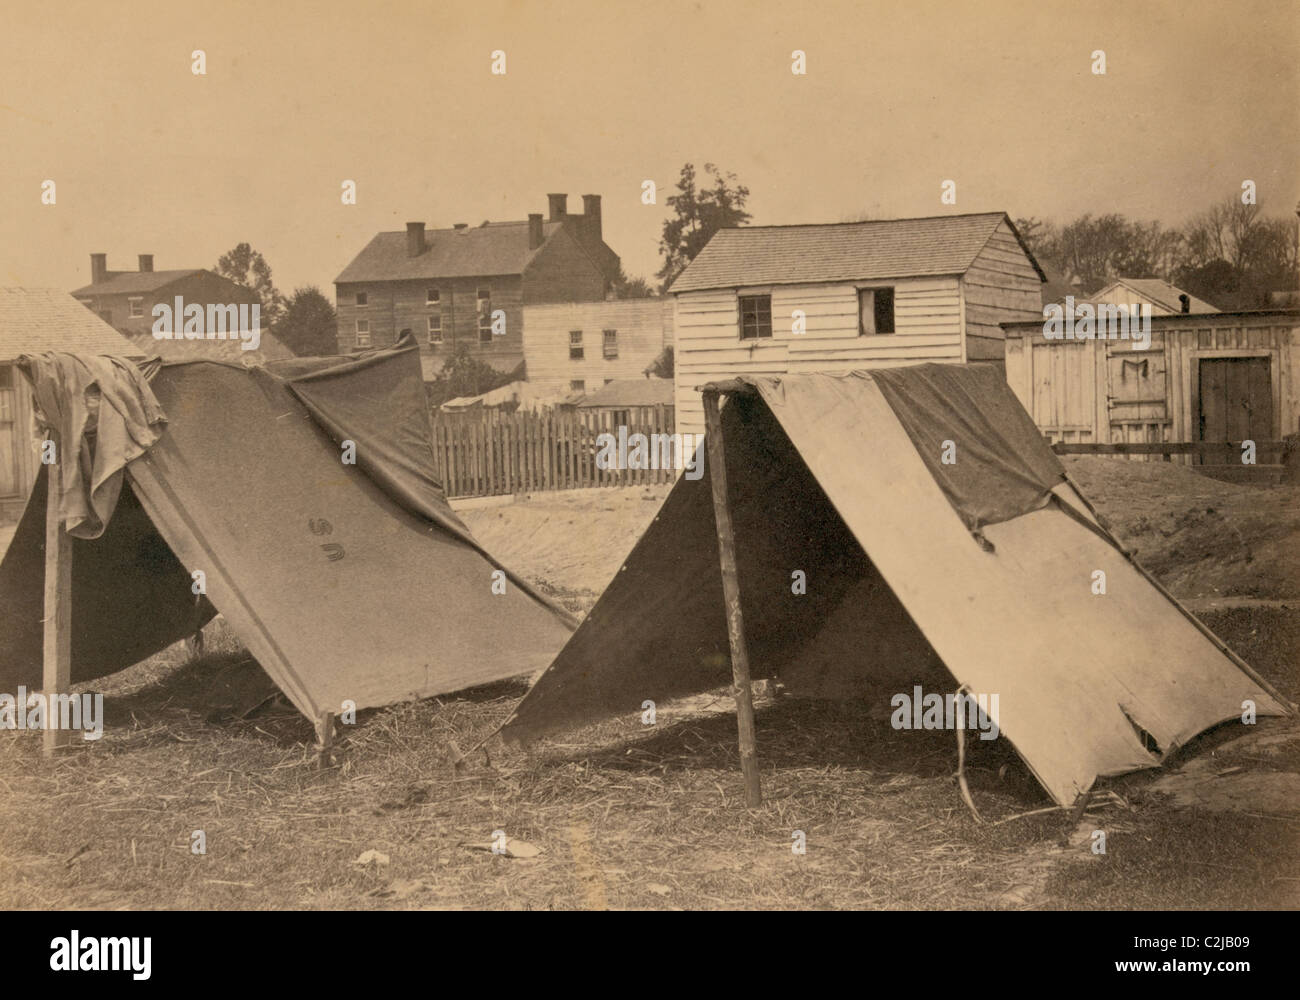 Soldier's Tents Stock Photo